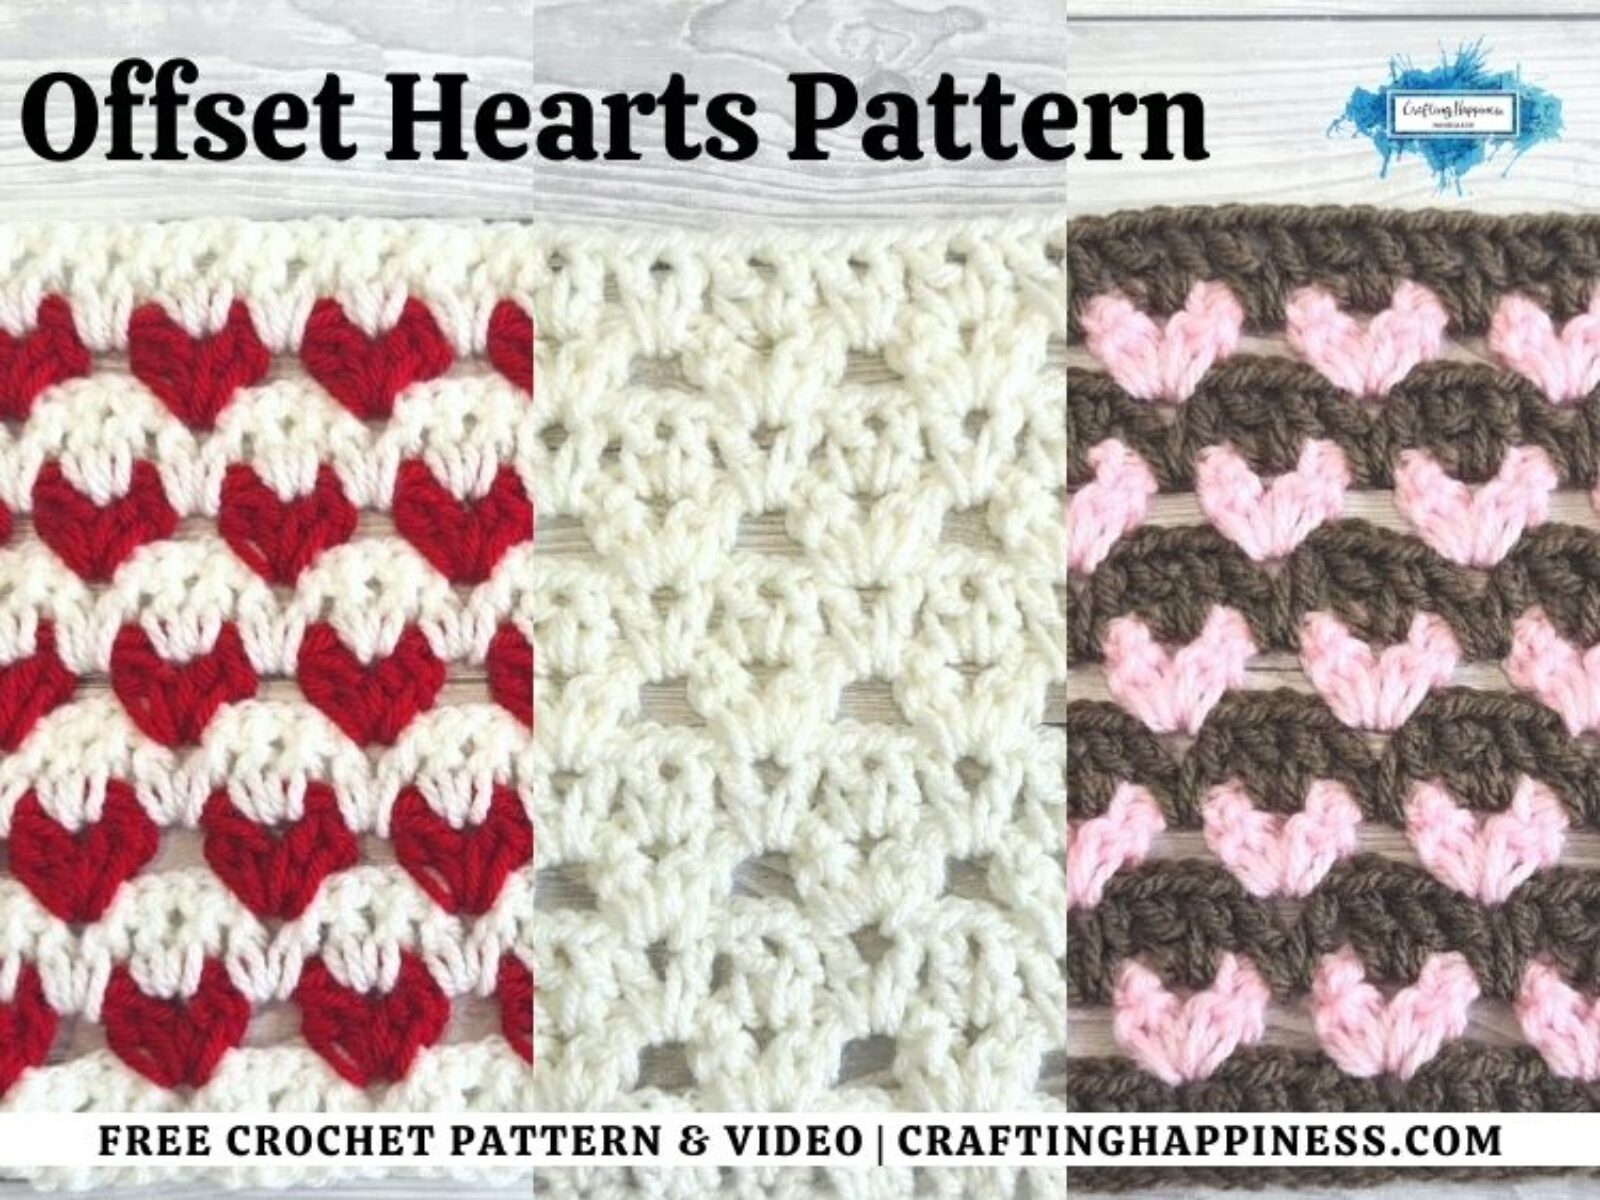 FB BLOG POSTER - Crochet Offset Hearts Pattern Crafting Happiness